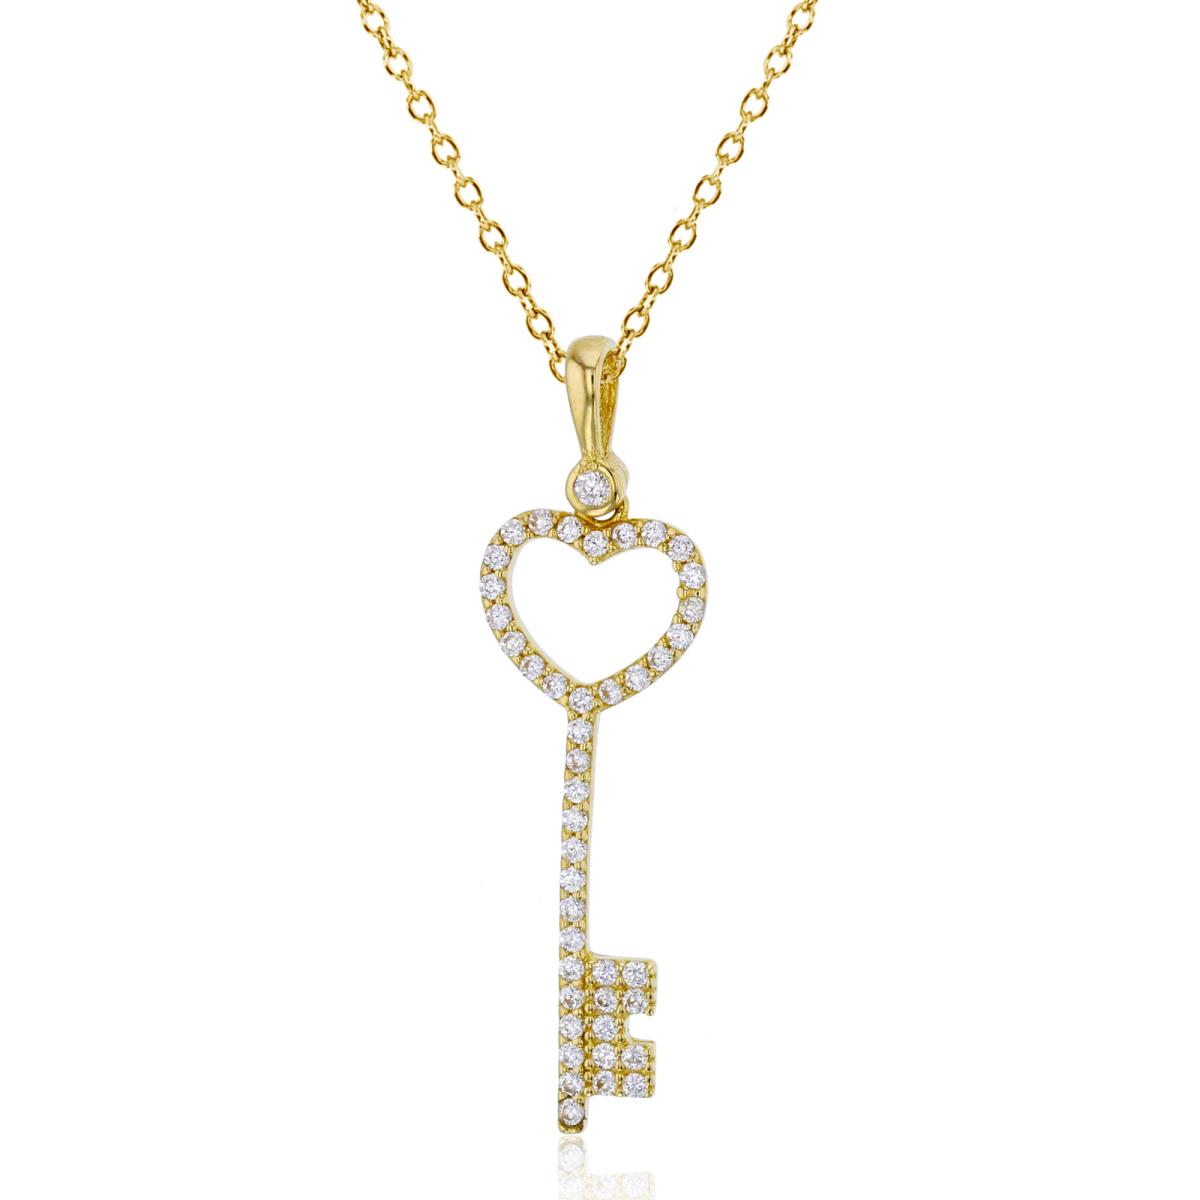 10K Yellow Gold 33x9mm Open Micropave Key Dangling 18" Necklace